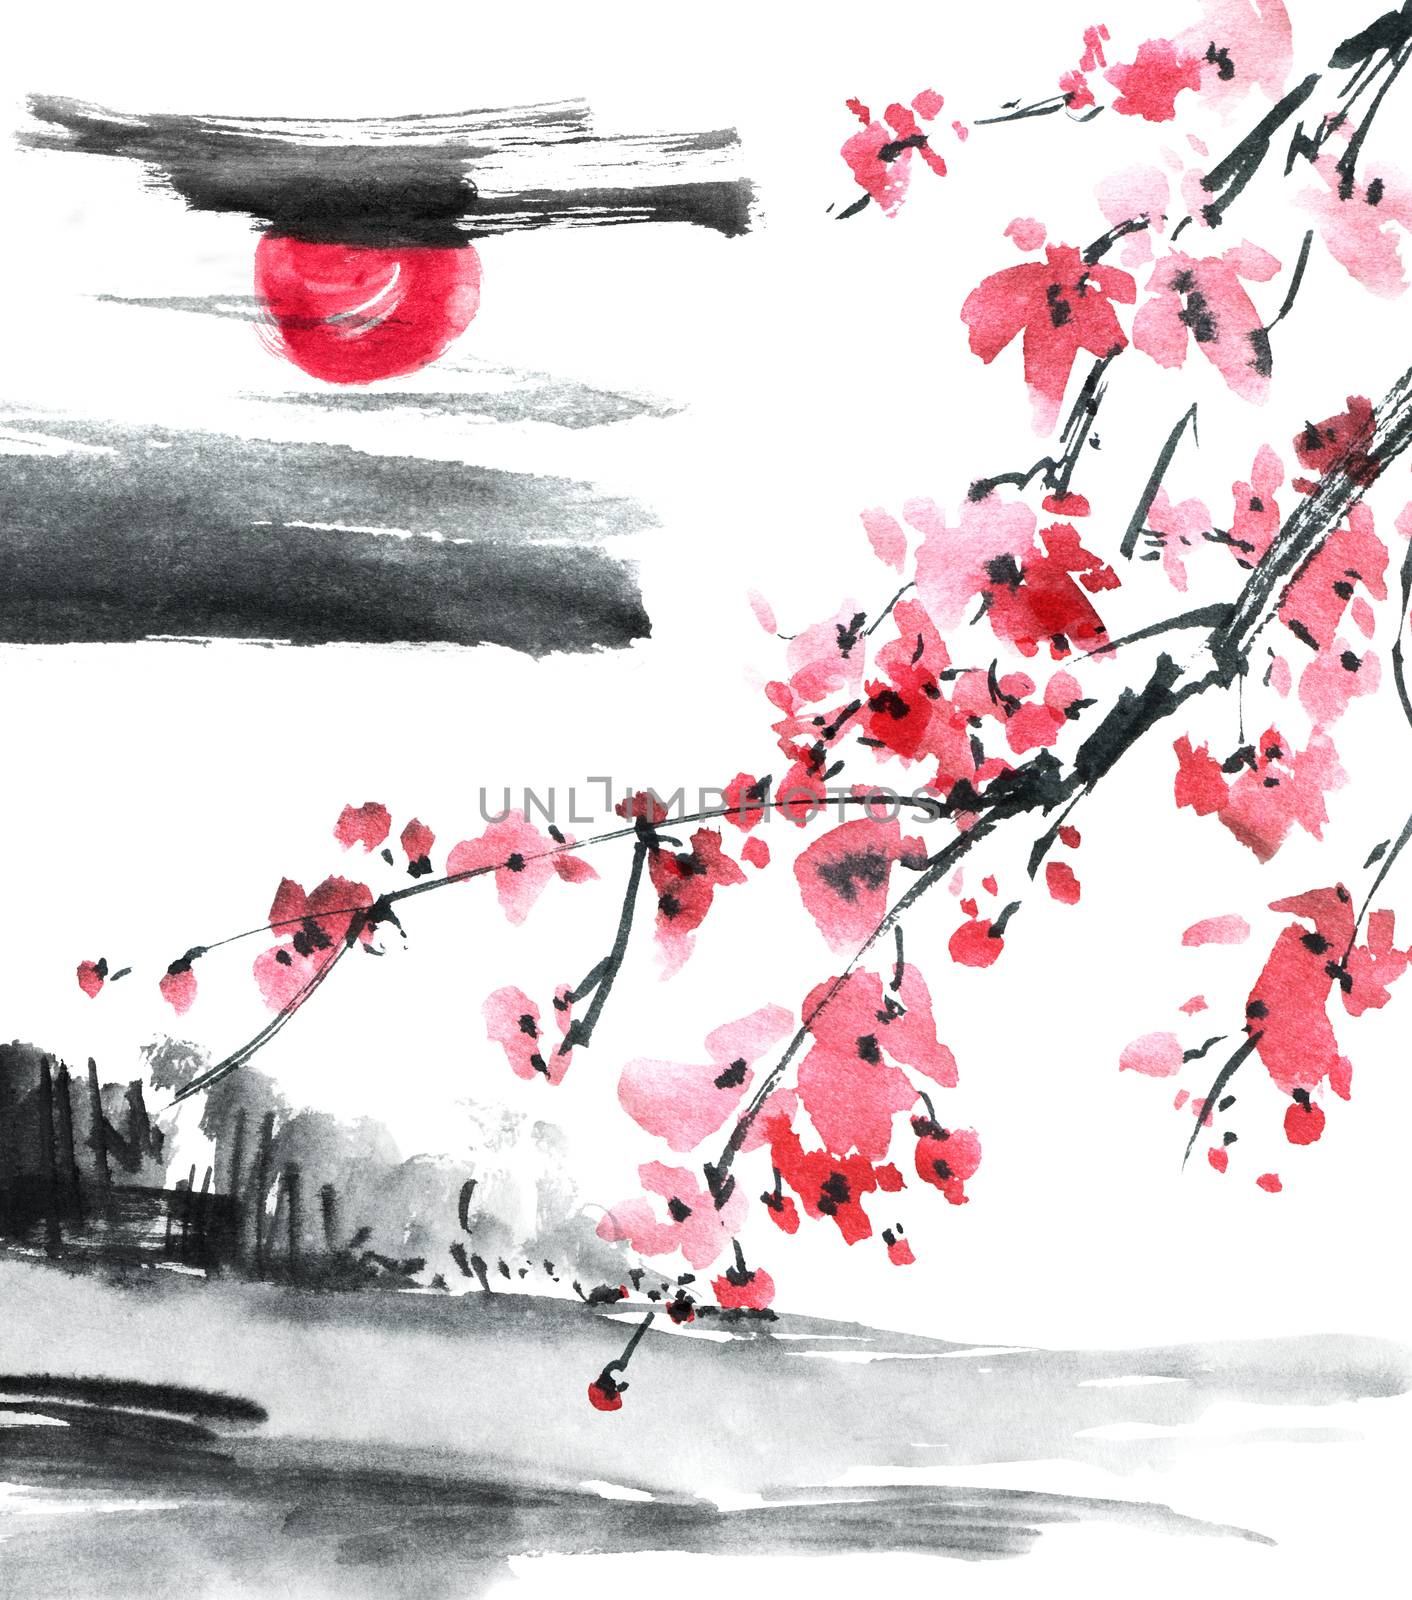 Watercolor and ink illustration of blossom sakura tree with pink flowers on abstract landscape background. Oriental traditional painting in style sumi-e, u-sin.